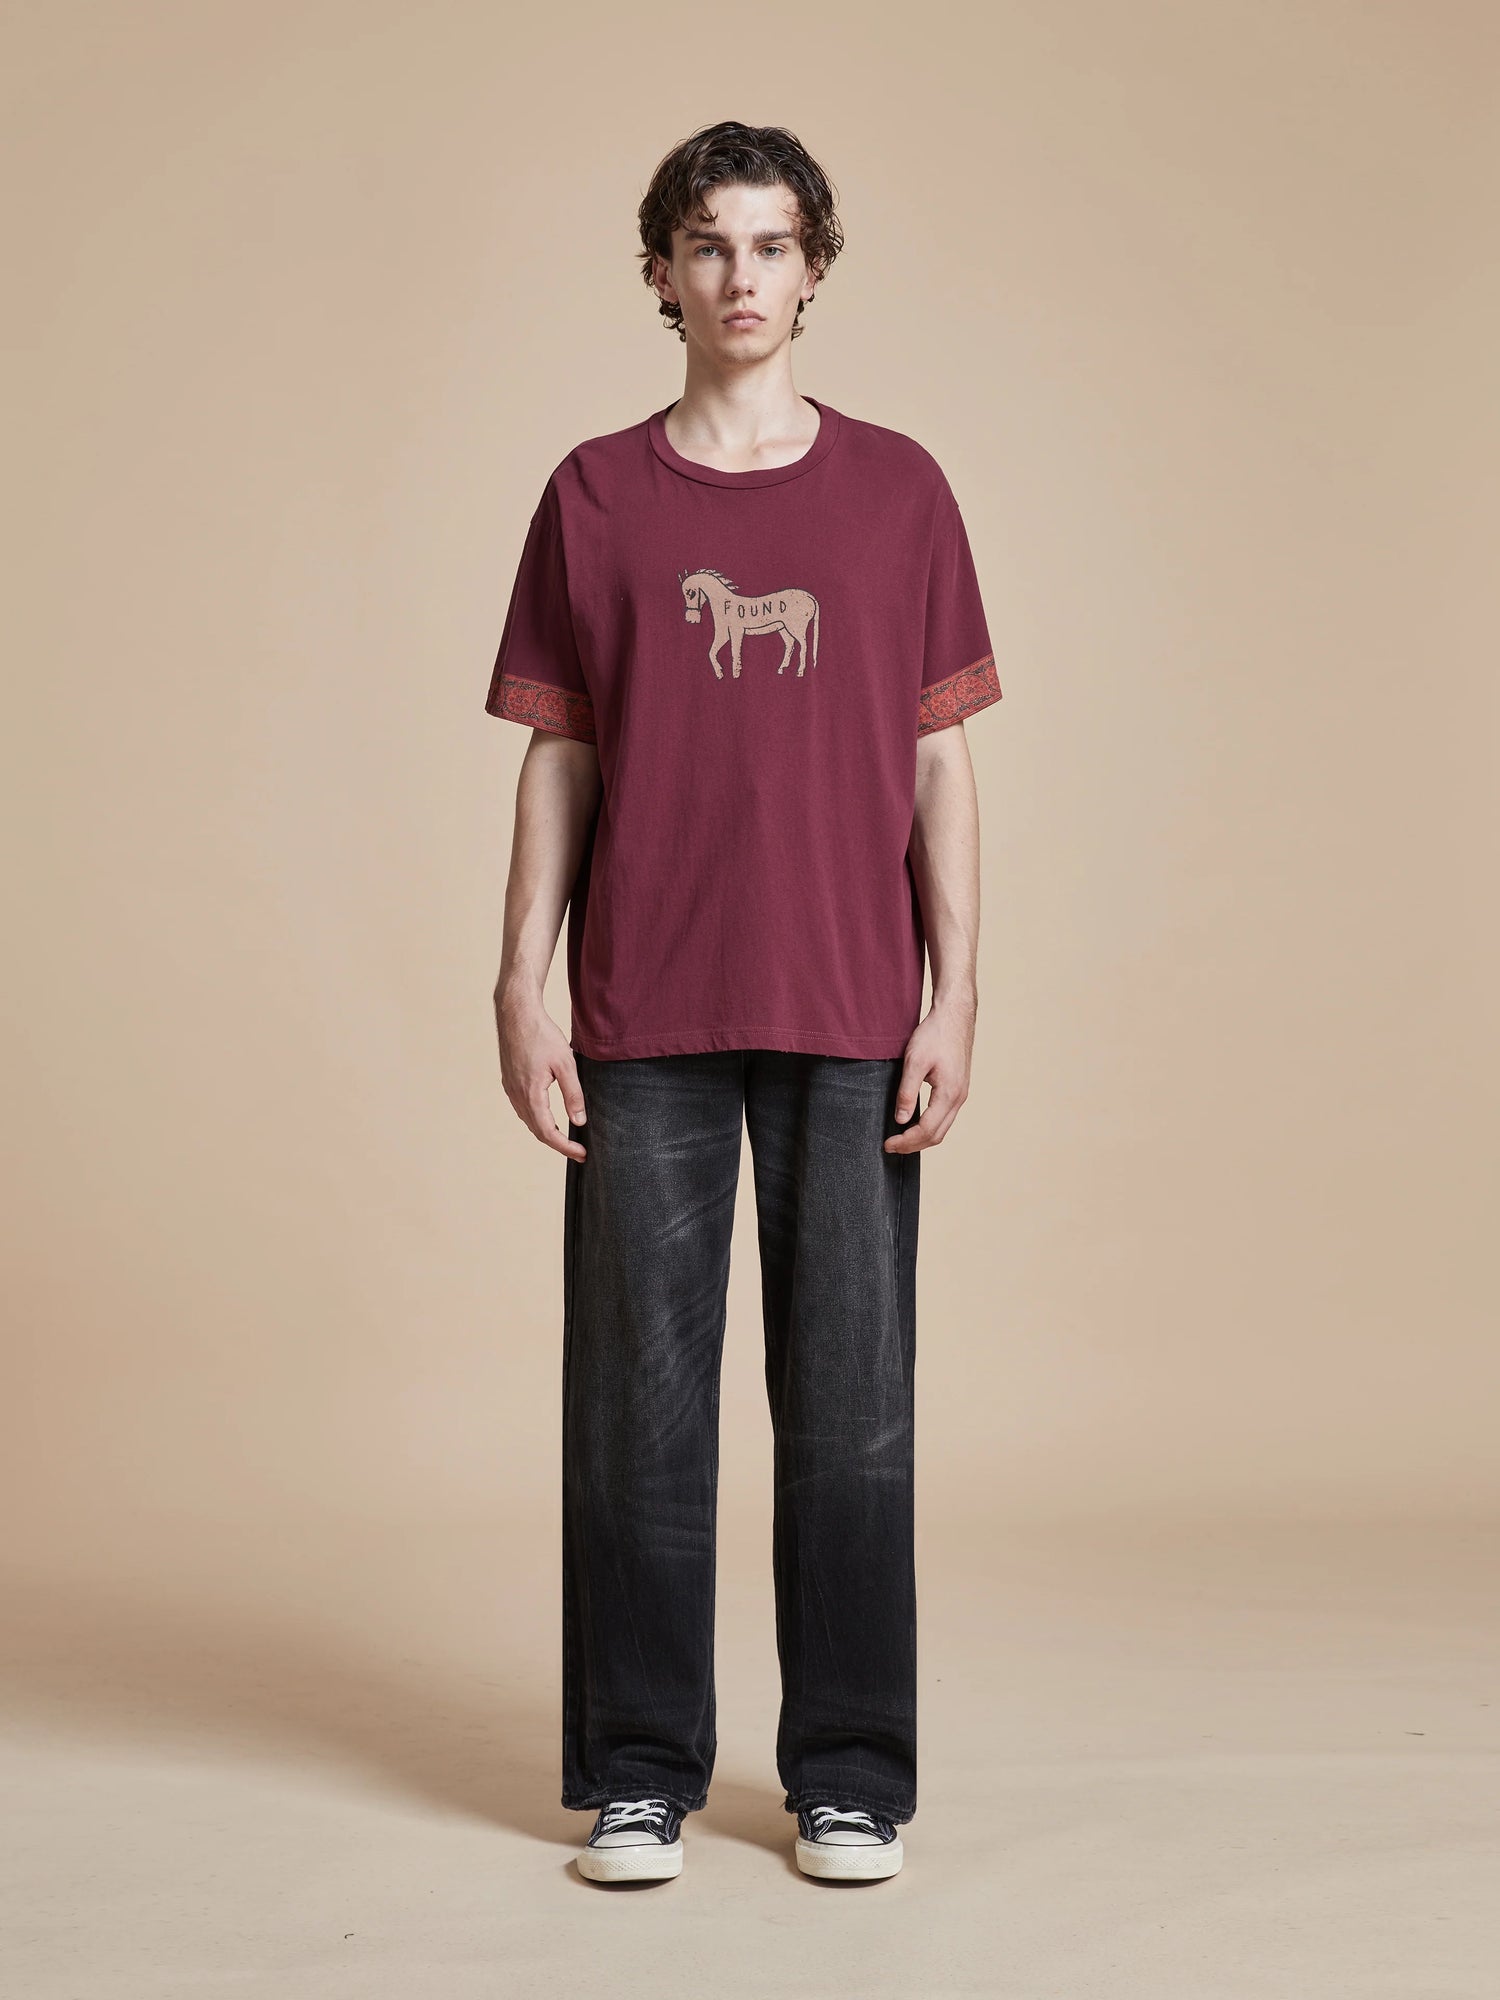 A man wearing a faded purple wash Horse Embellishment Tee by Found.